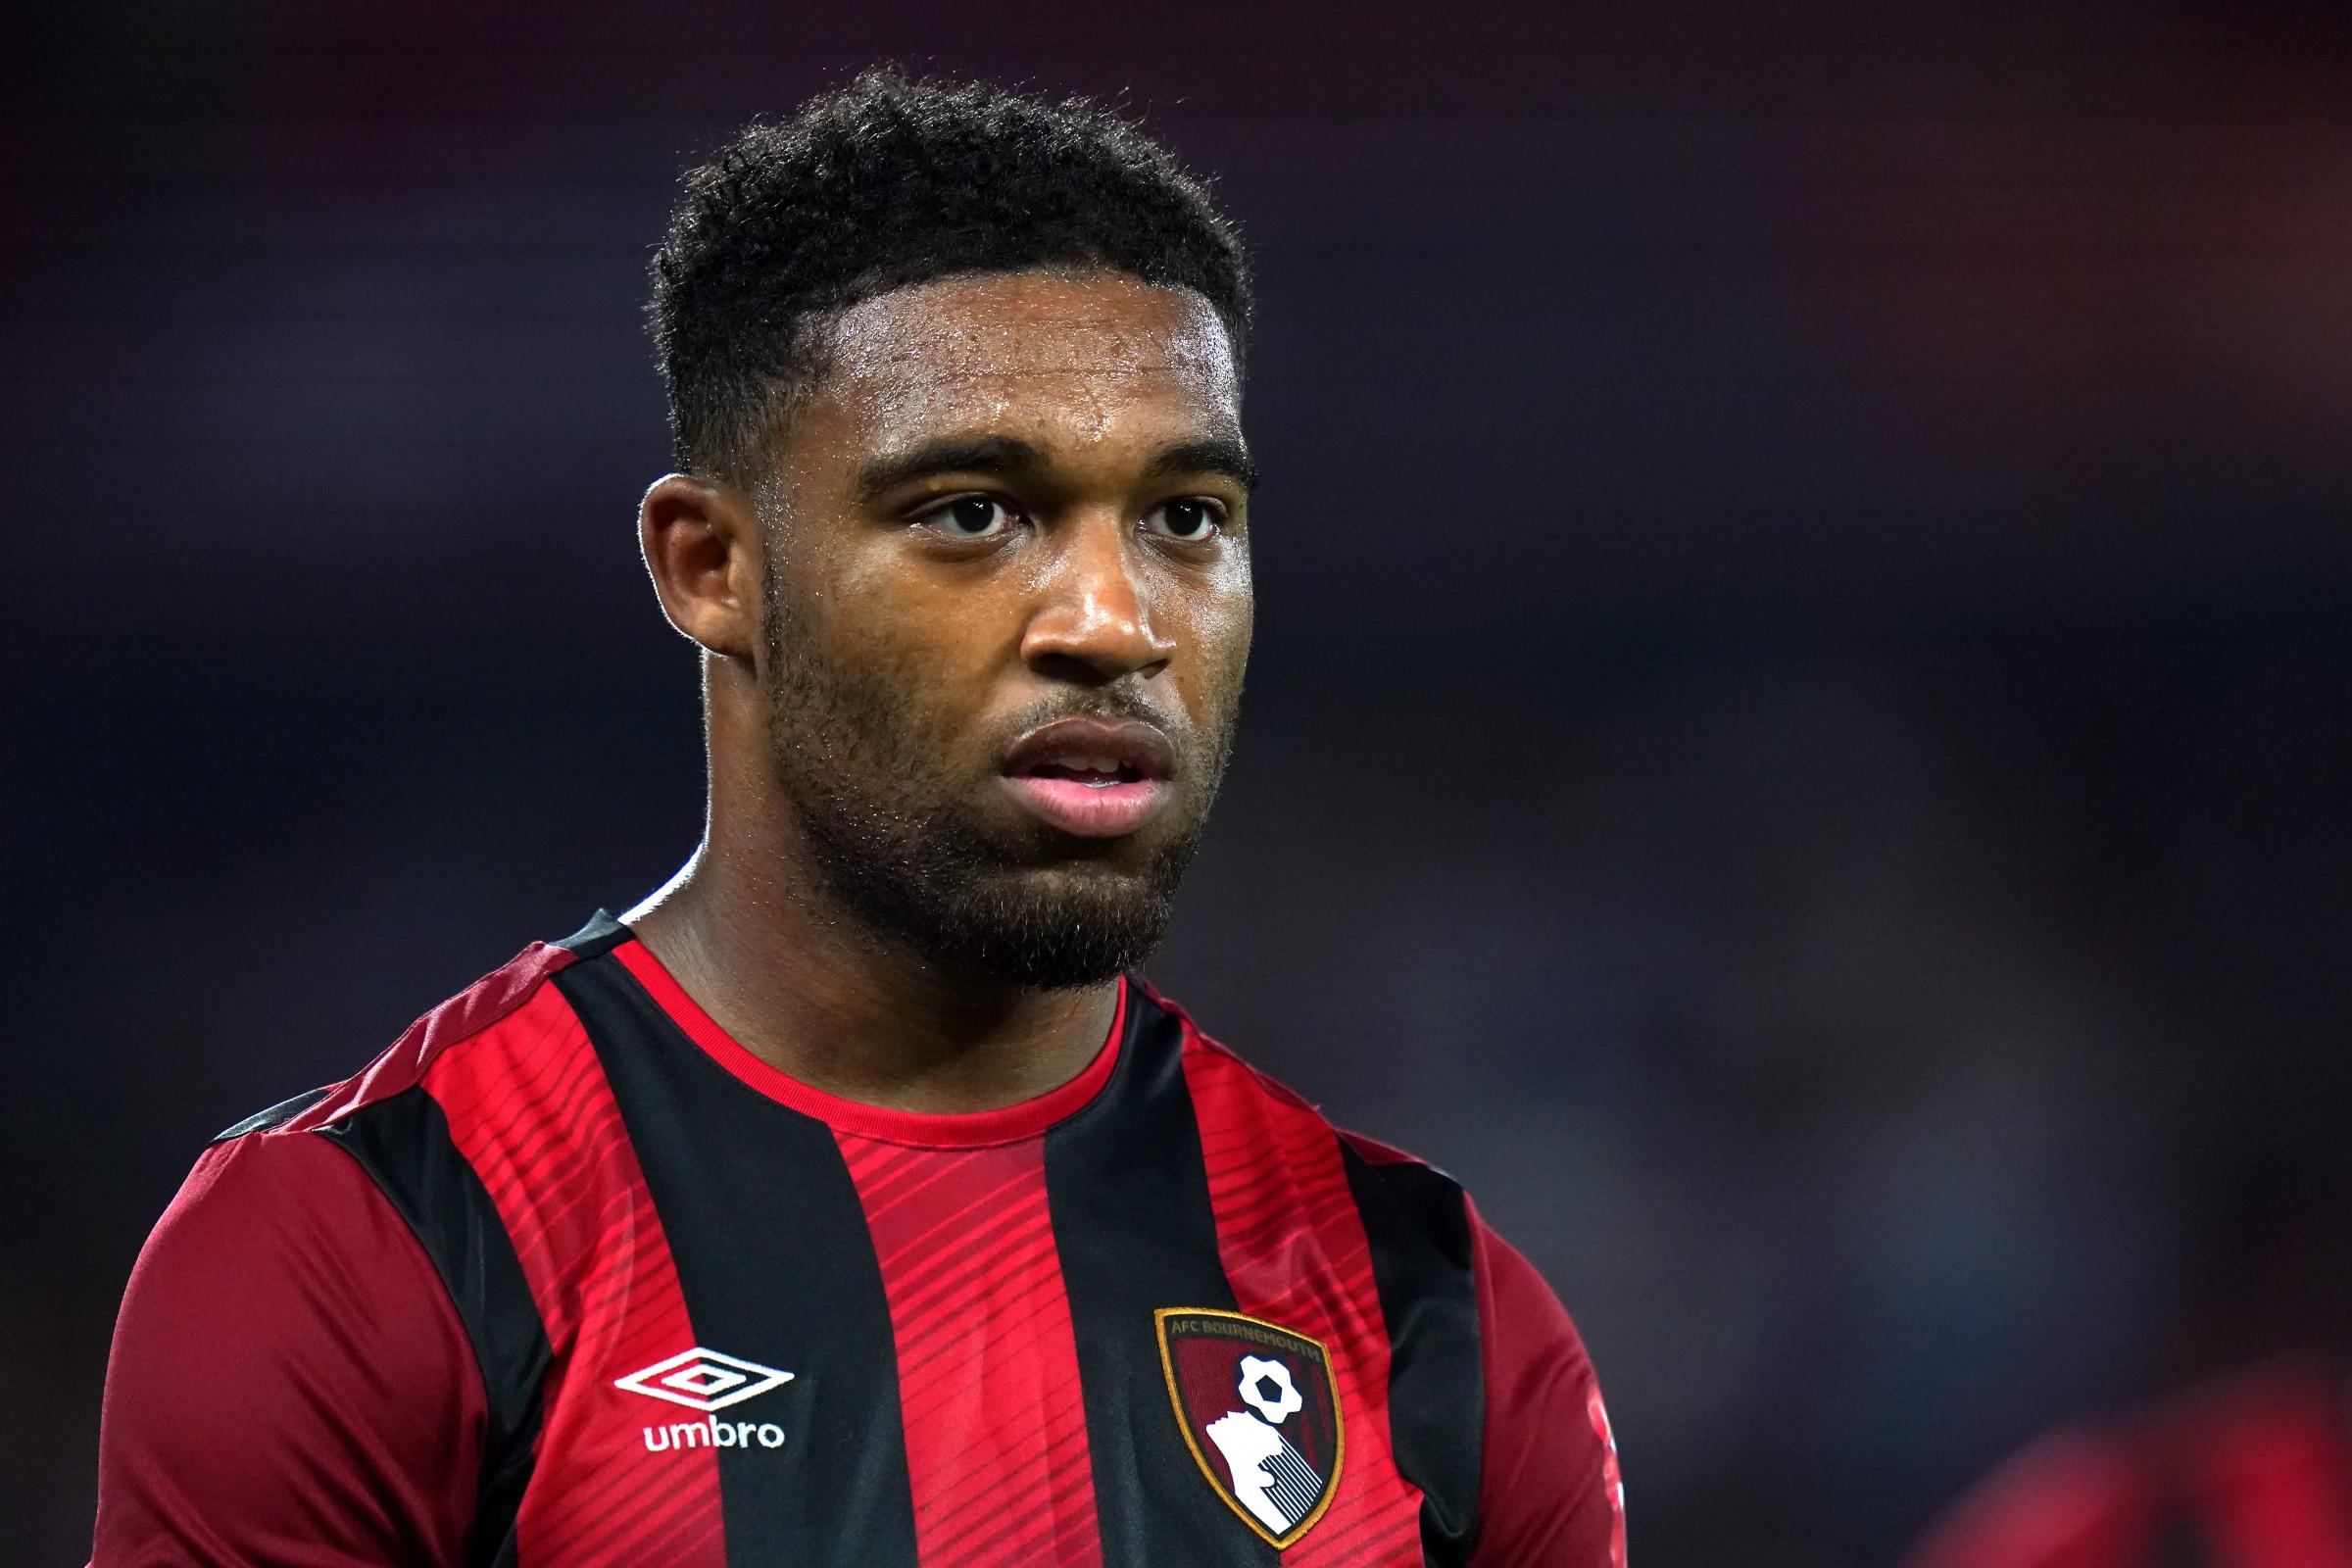 AFC Bournemouth's Jordon Ibe issues apology over haircut